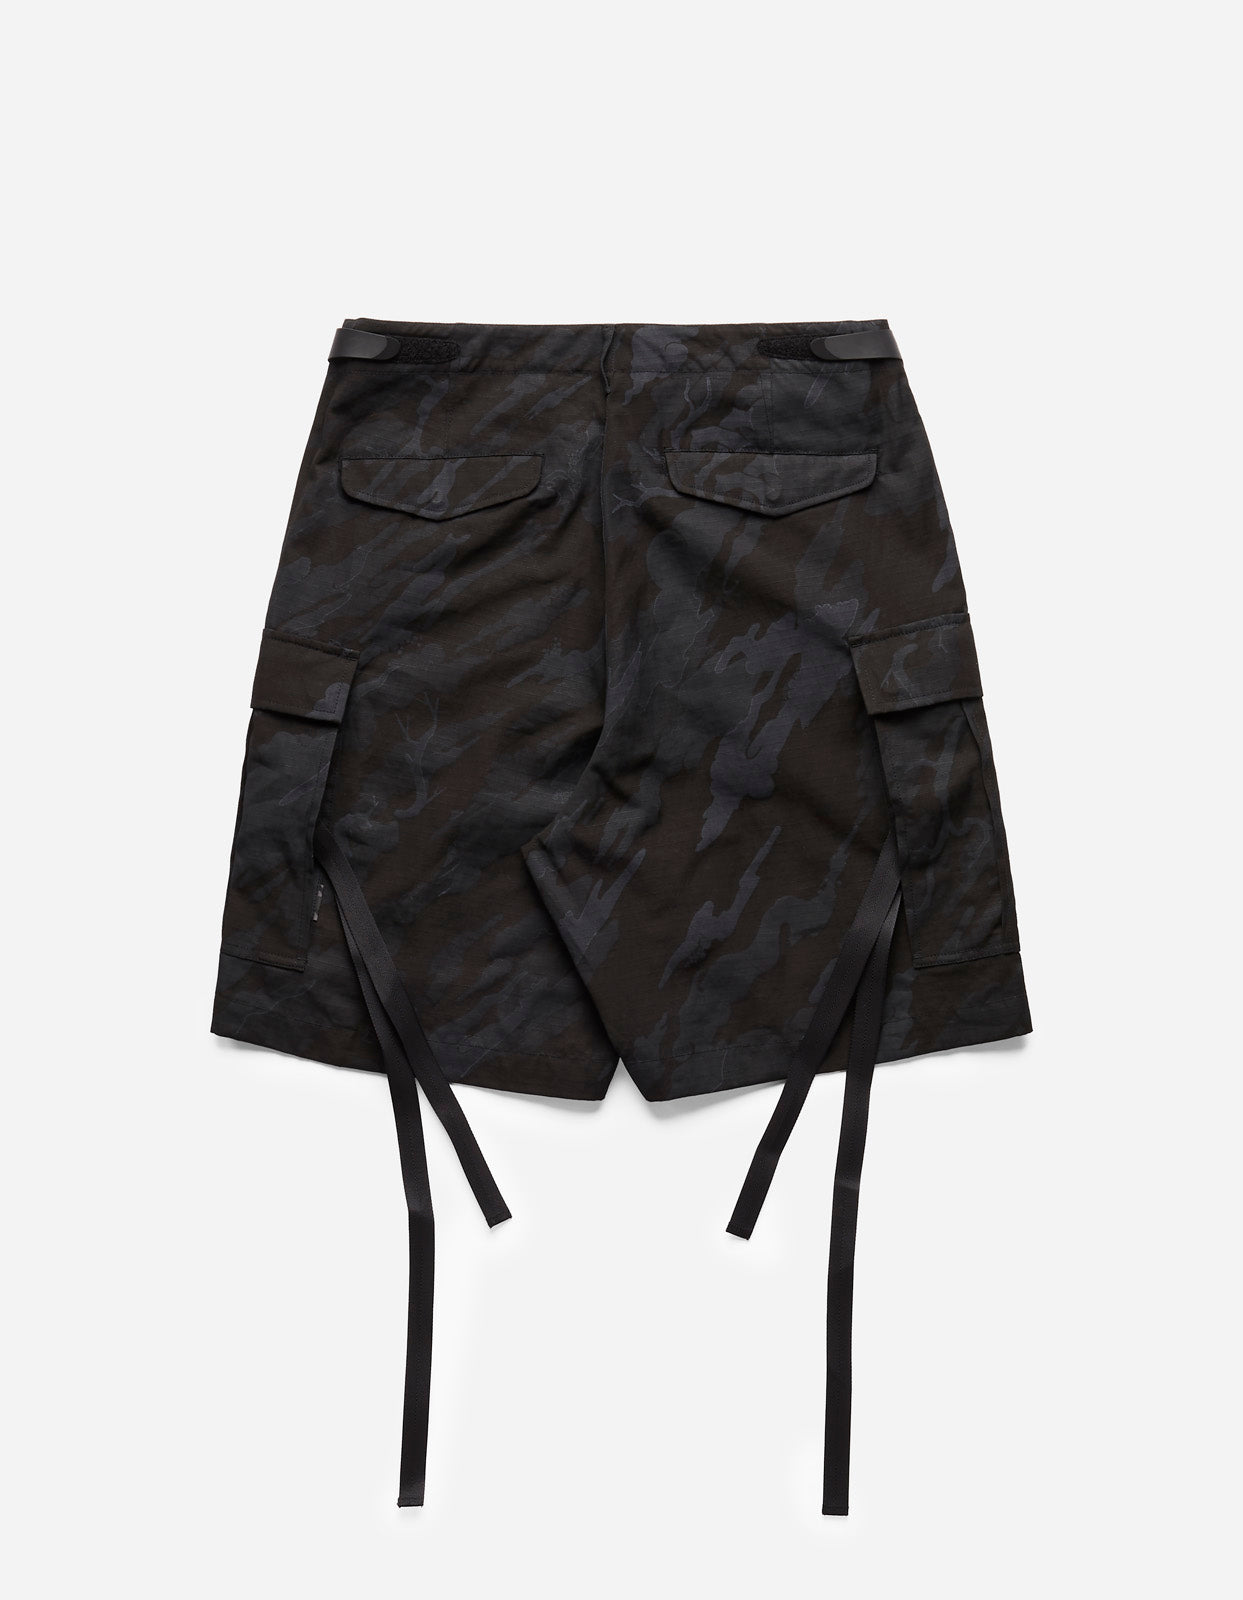 4261 DPM: Bonsai Forest Cordura® NYCO® Cargo Shorts Subdued Night